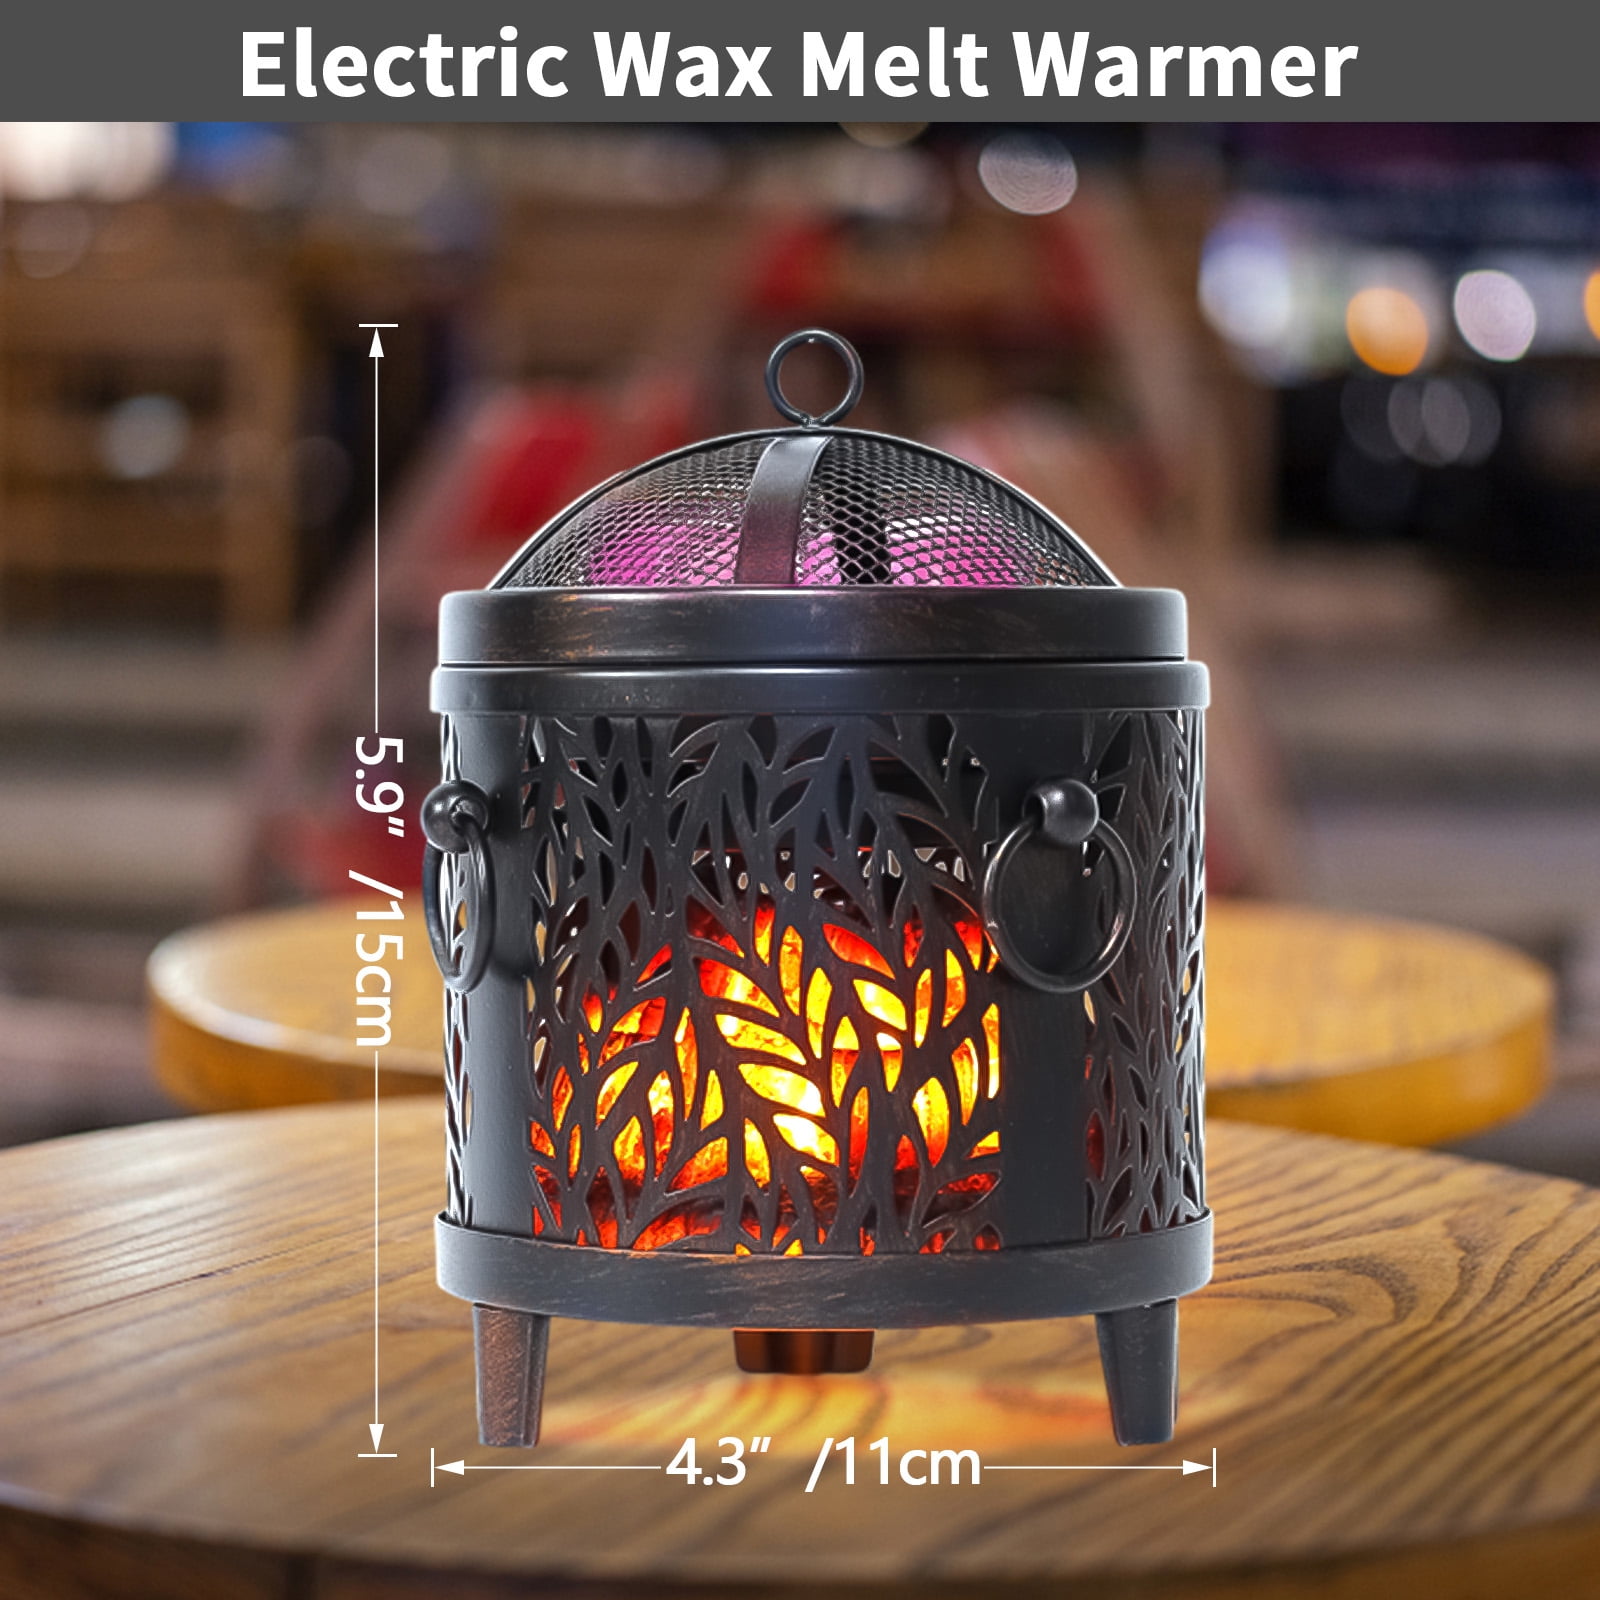 NAFANG Flickering Fireplace Wax Warmer,Electric Wax Melt Warmer,Candle Wax Warmer for Scented Wax Melts,Wax Warmers for Wedding and Home Decor Gifts